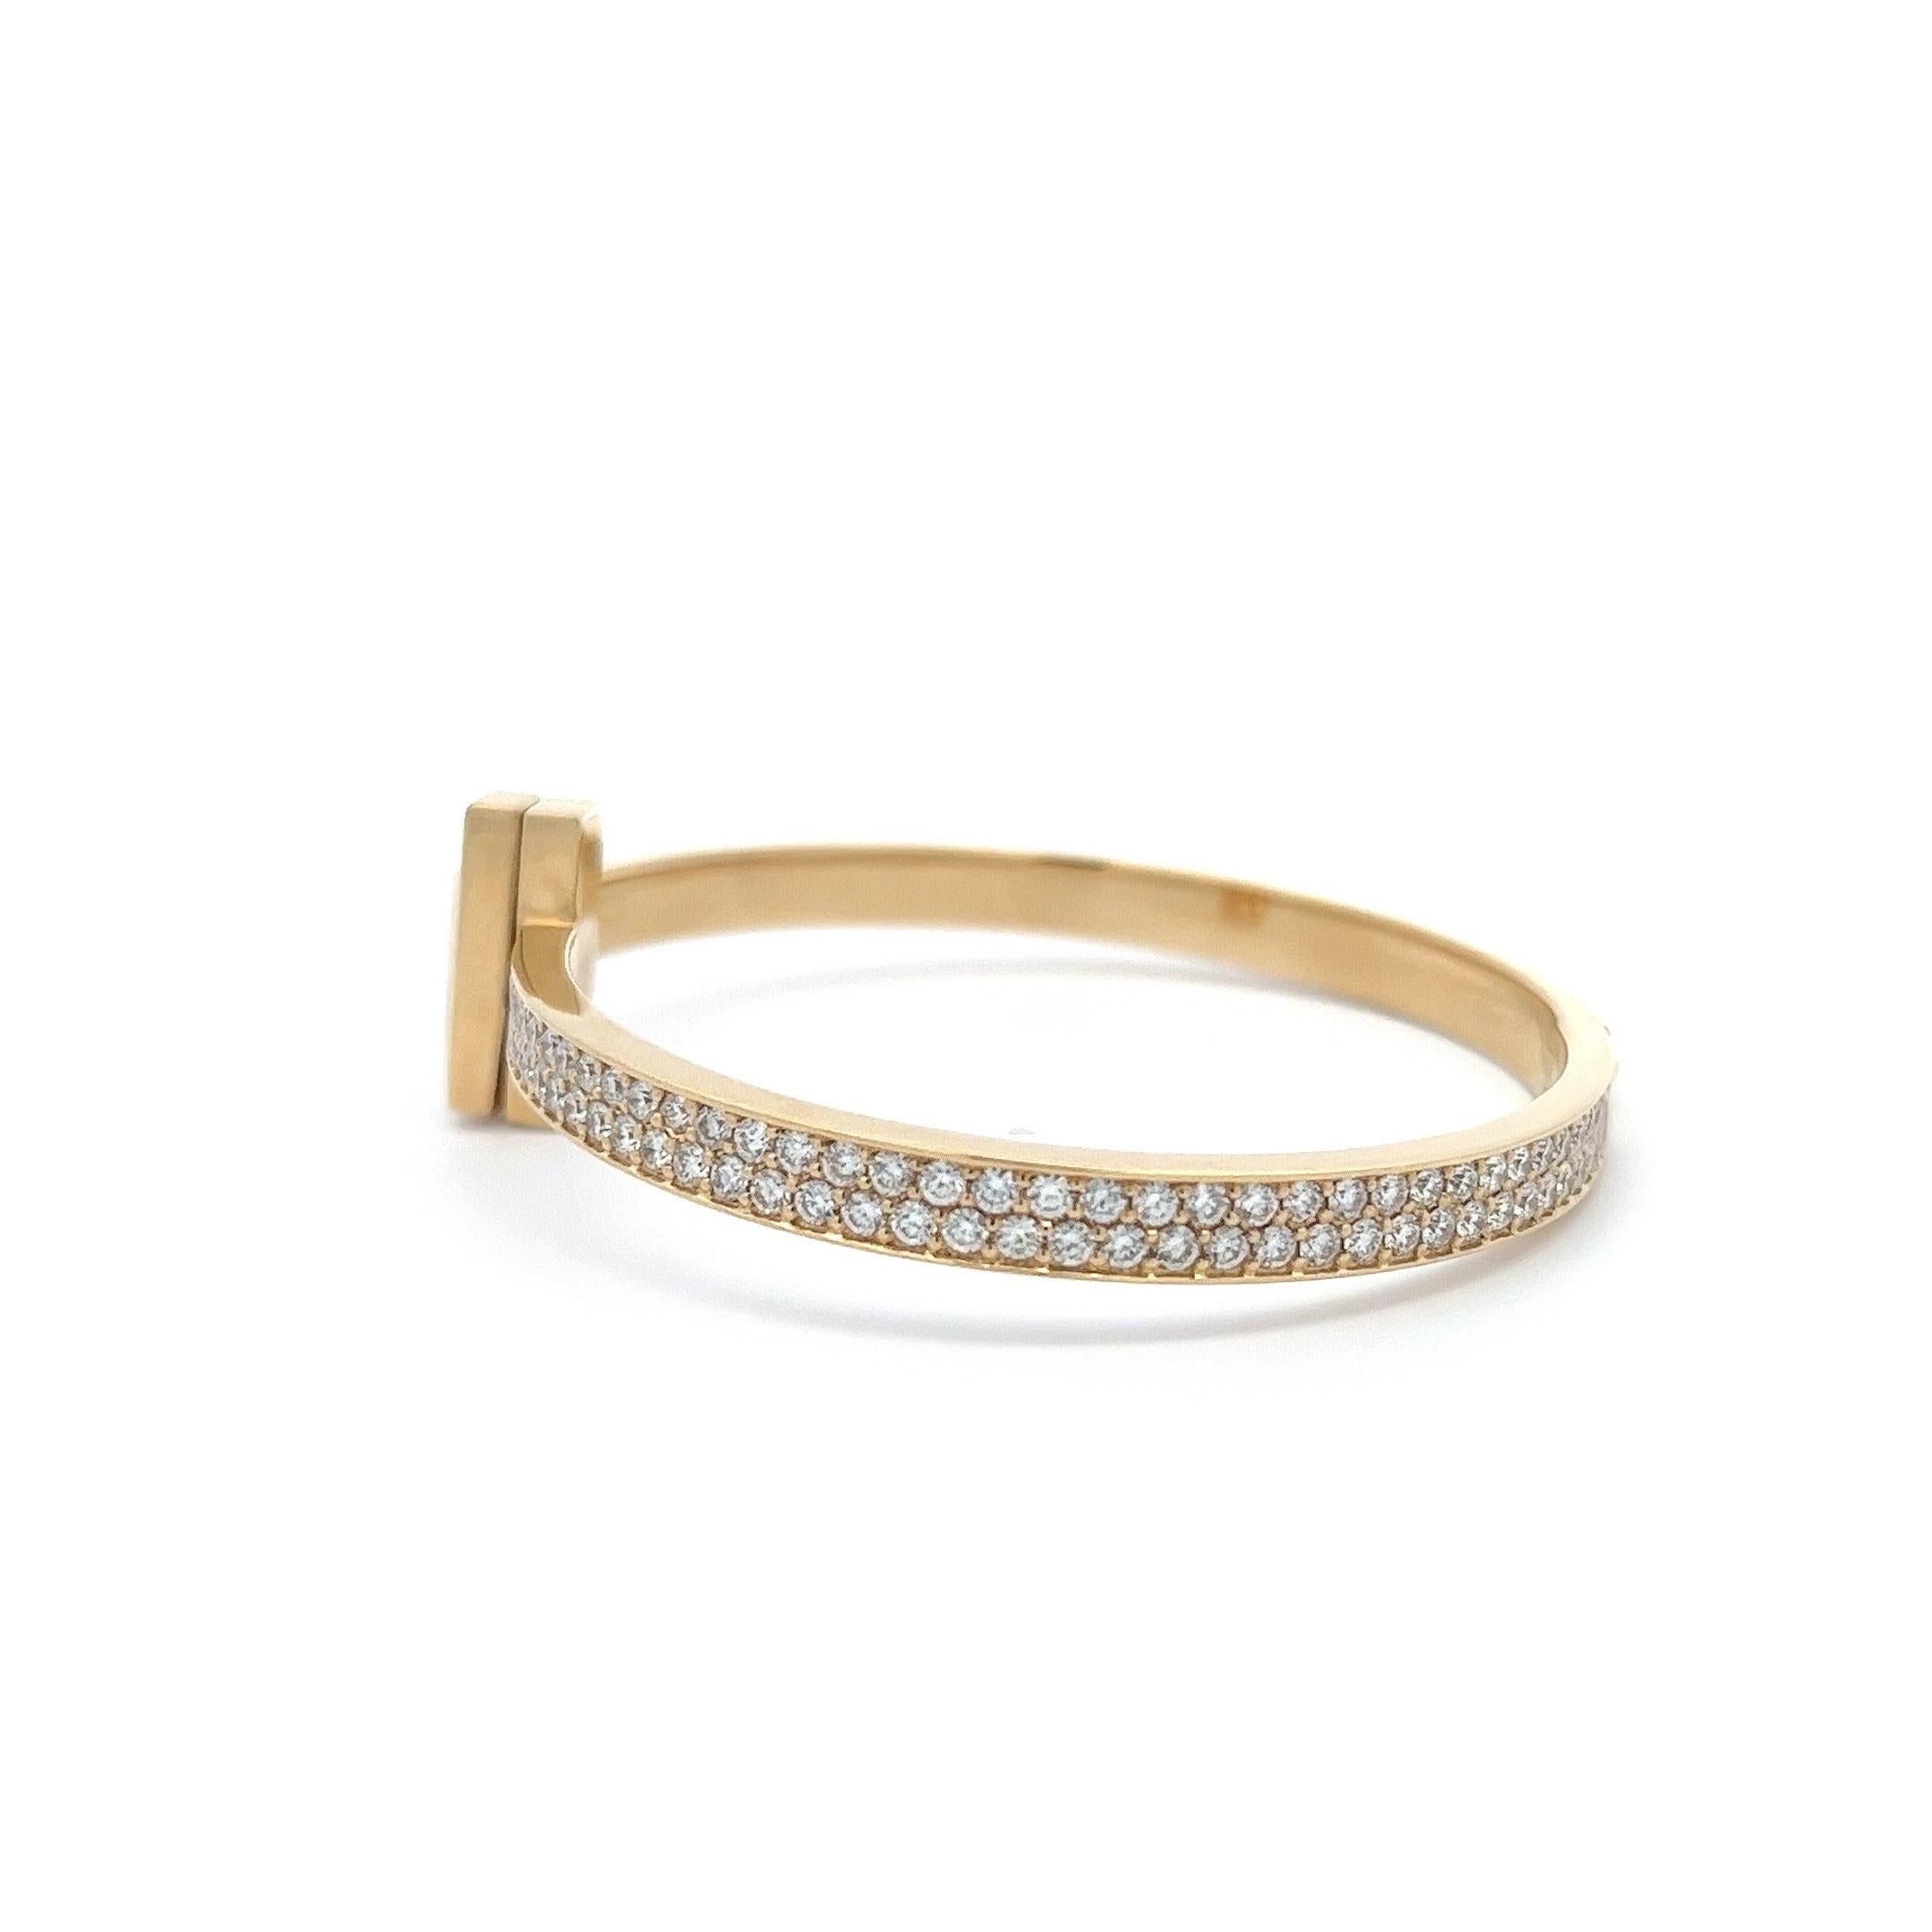 Introducing the Tiffany & Co. T1 Diamond Hinged Bracelet Cuff, a true embodiment of elegance and sophistication. Crafted with meticulous attention to detail, this exquisite bracelet exudes timeless beauty and luxury.

The bracelet features a sleek